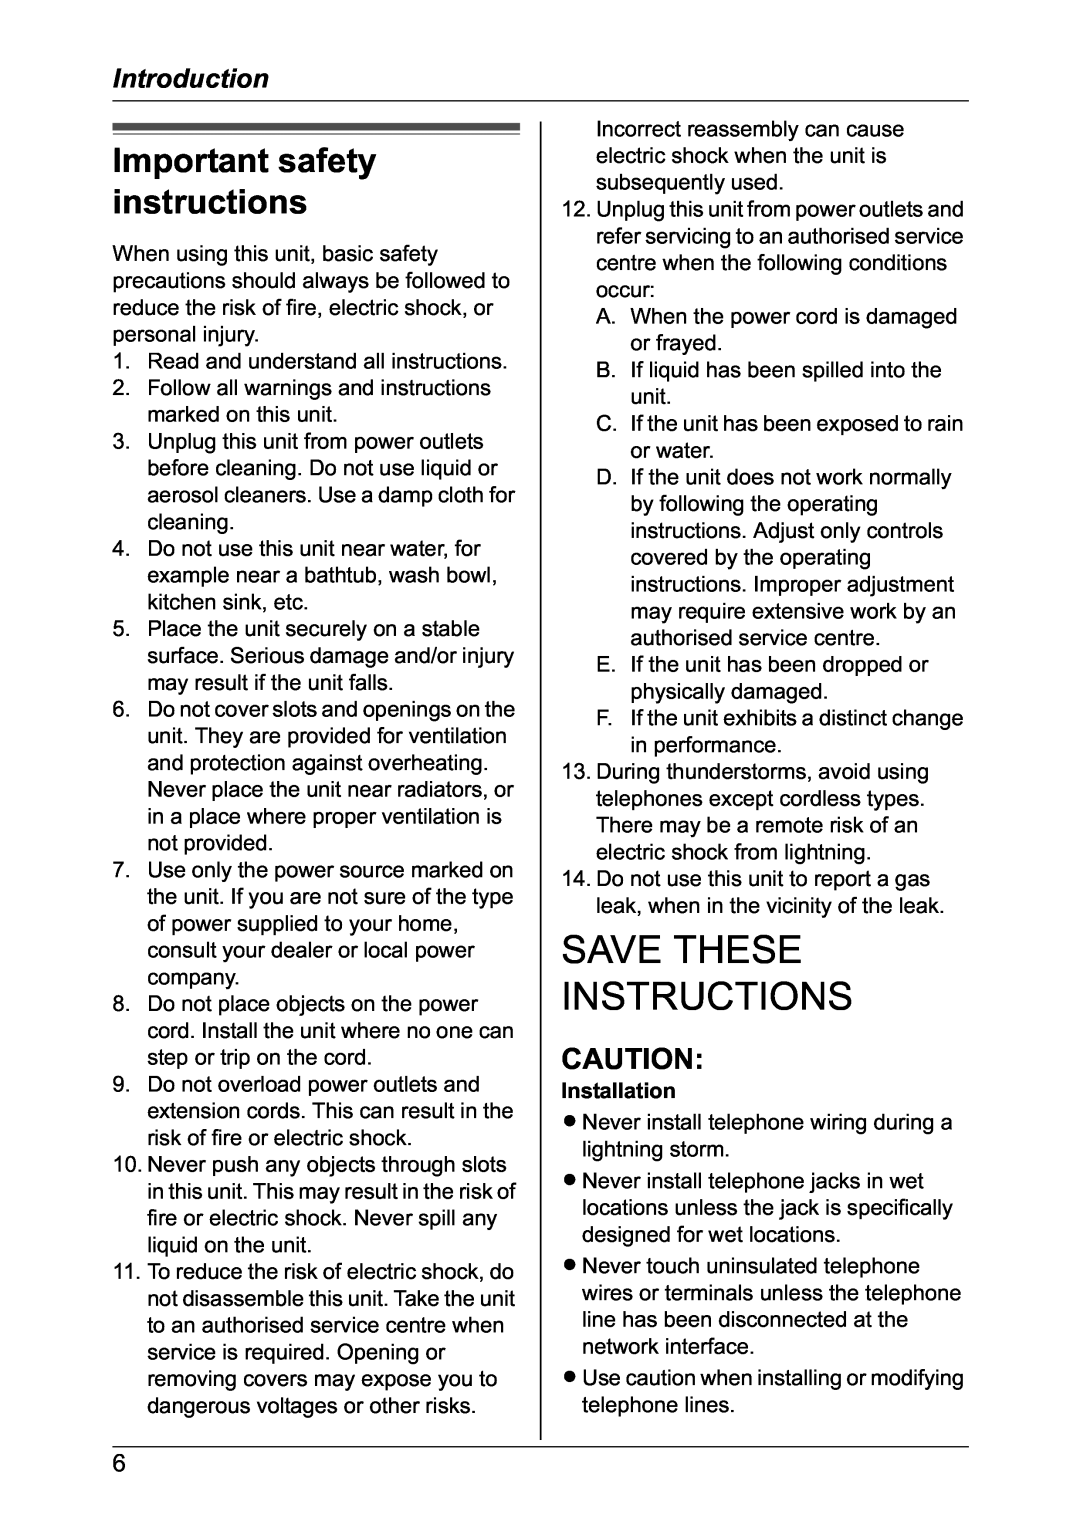 Panasonic KX-TG2431NZ, KX-TG2432NZ Important safety instructions, Installation, Save These Instructions, Introduction 